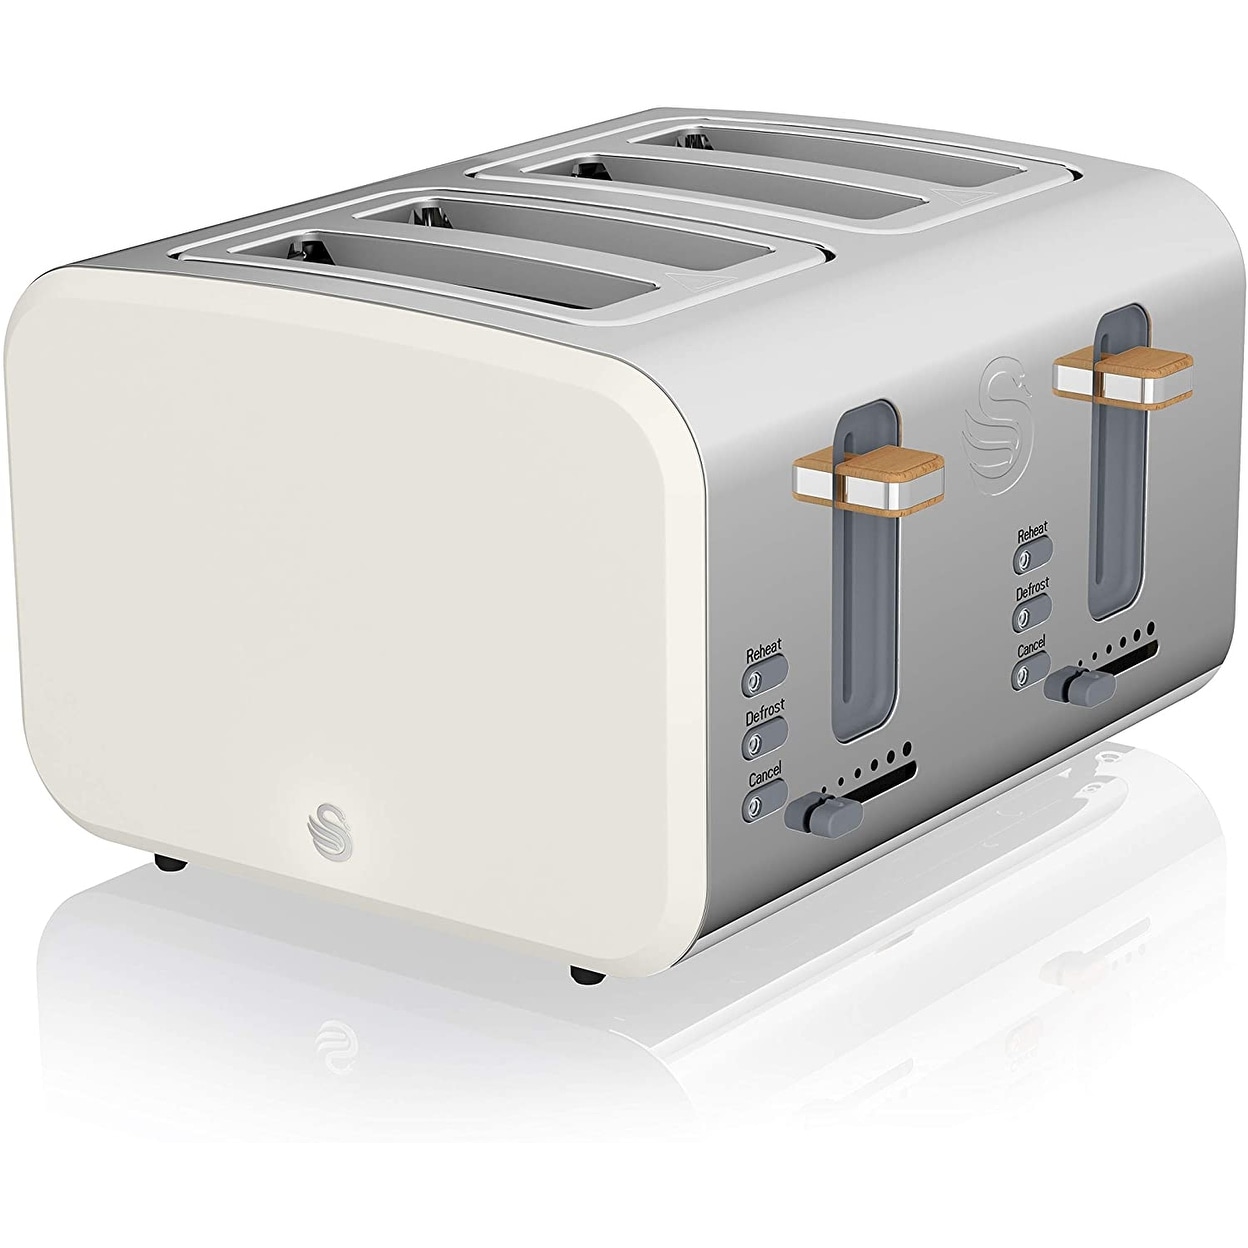 https://ak1.ostkcdn.com/images/products/is/images/direct/ba0dc2dbd9f1ae300f2655b325cbe9046b5585d8/Swan-ST14620WHTN-Nordic-4-Slice-Toaster-White.jpg